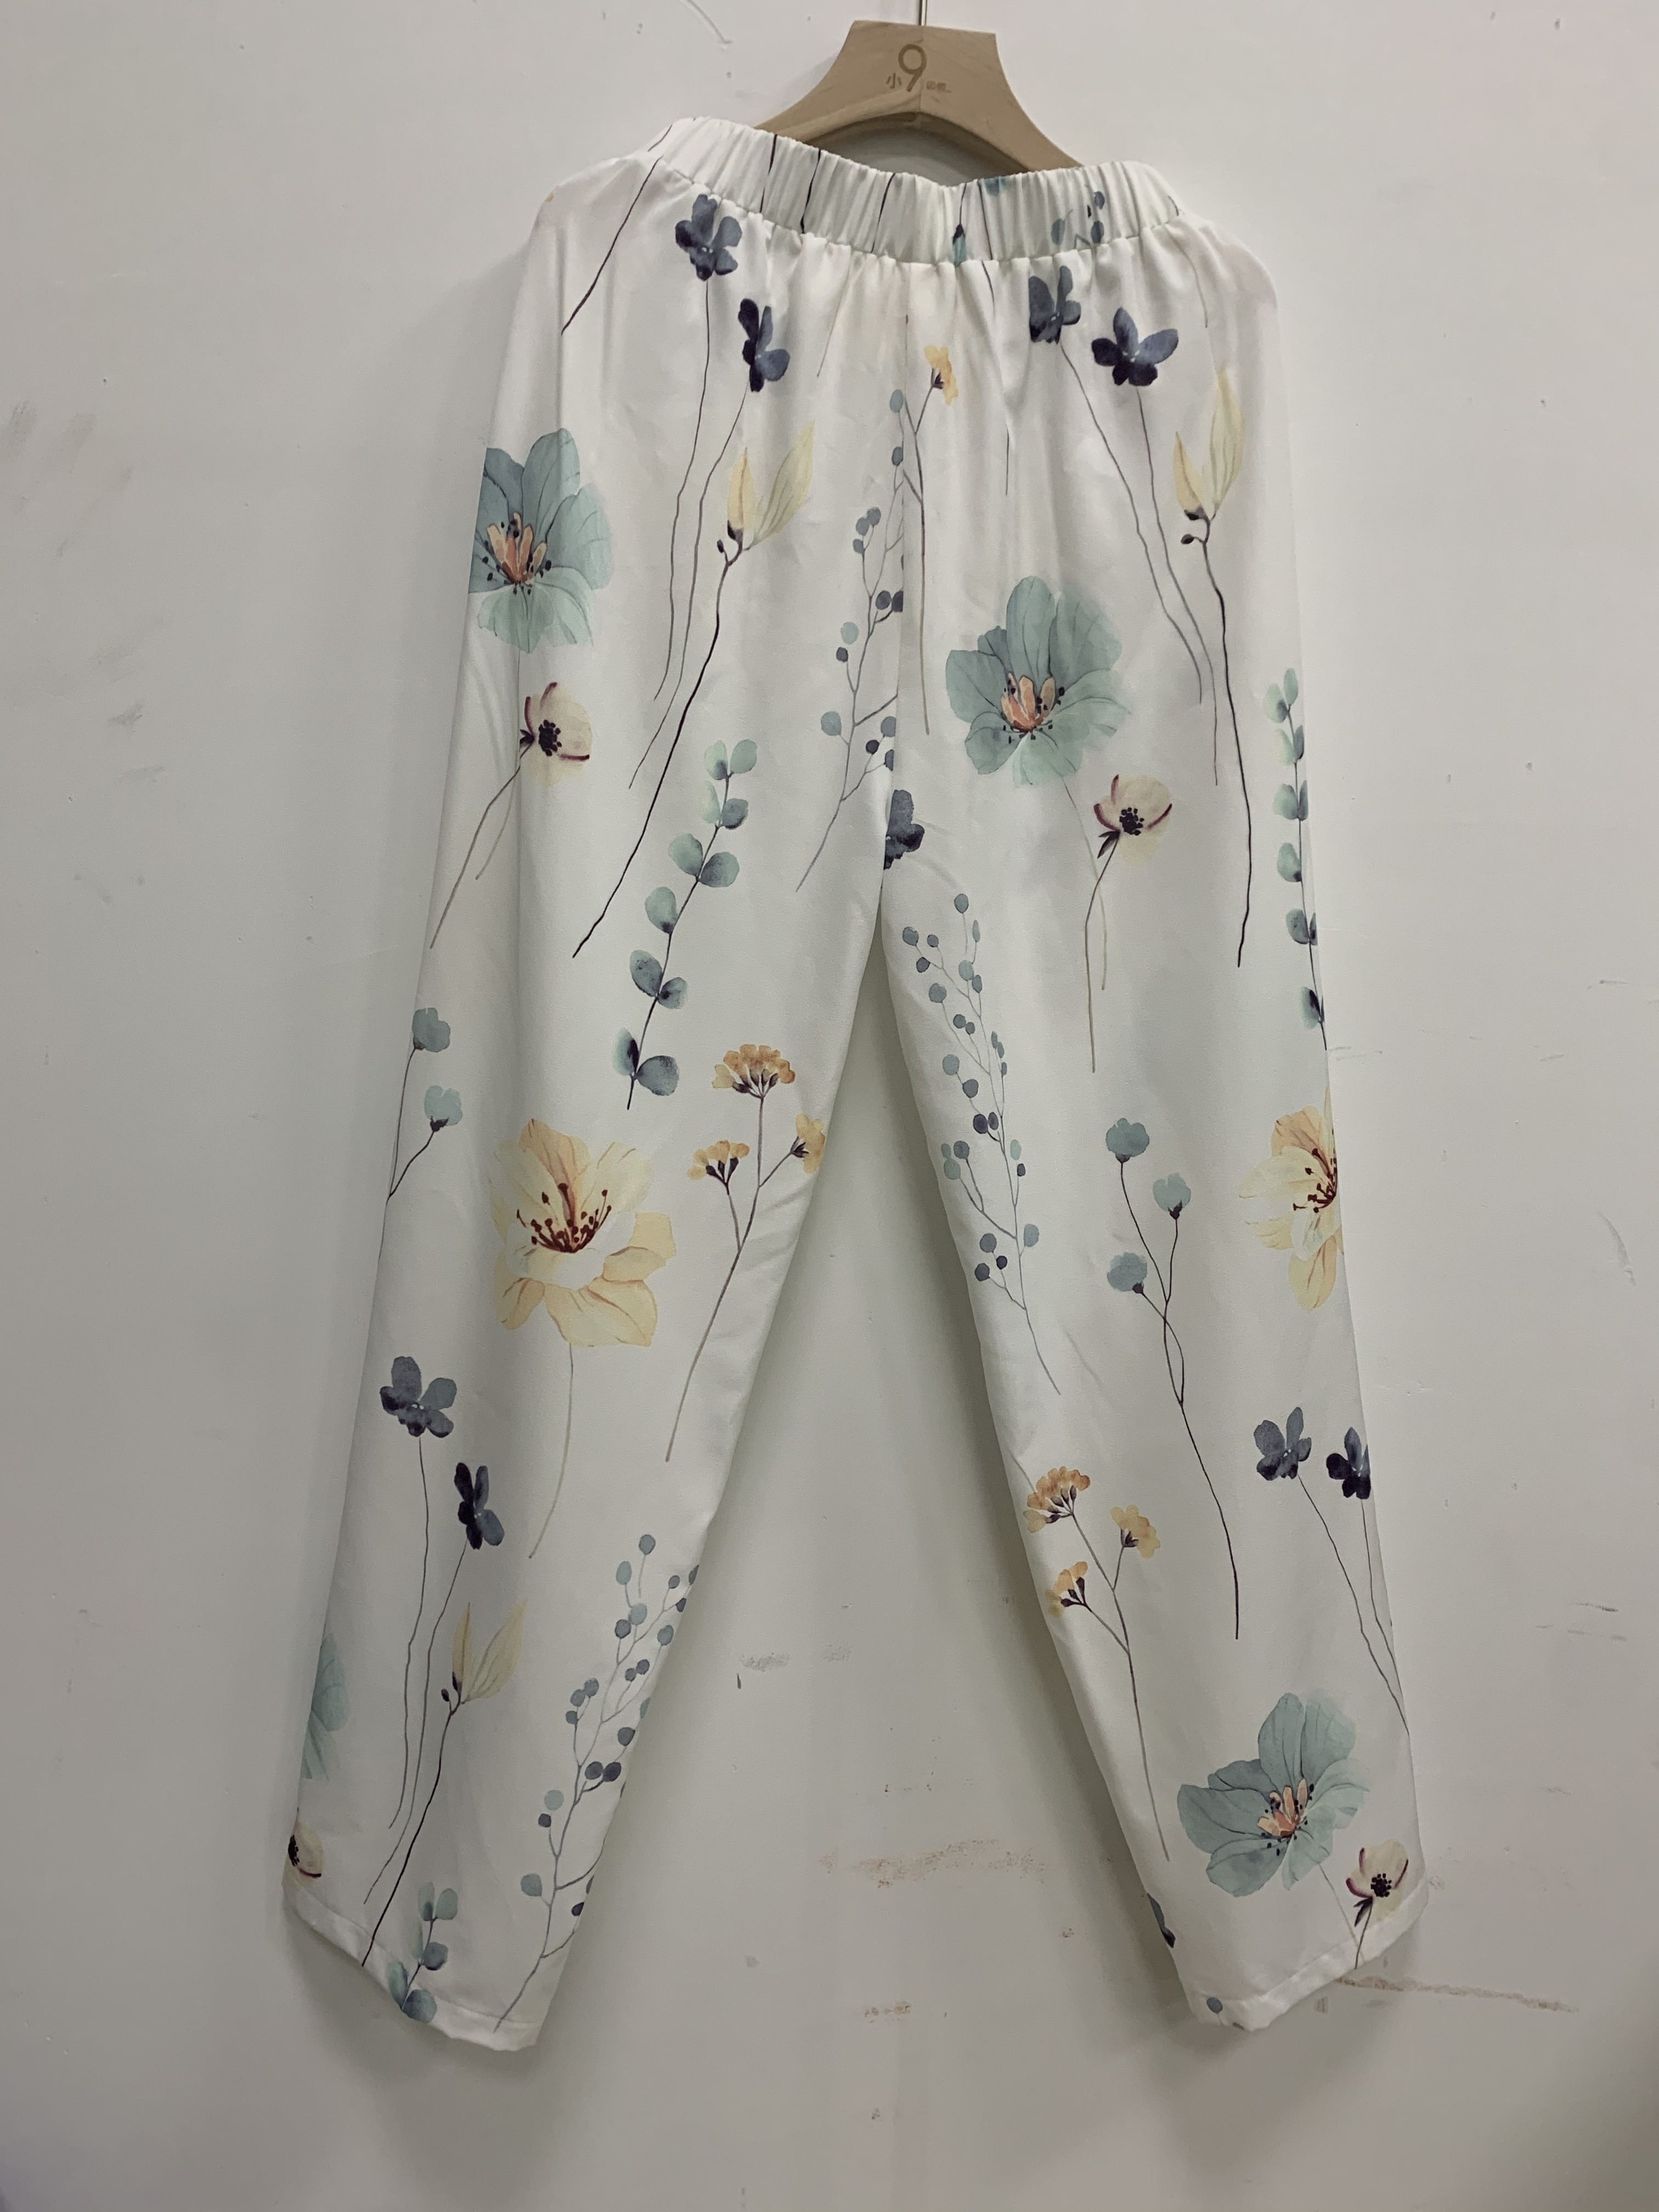 Mother's Day Tawop Women'S Casual Floral Printed Waist Long Pants With  Pocket Stoko Pants June Festival 